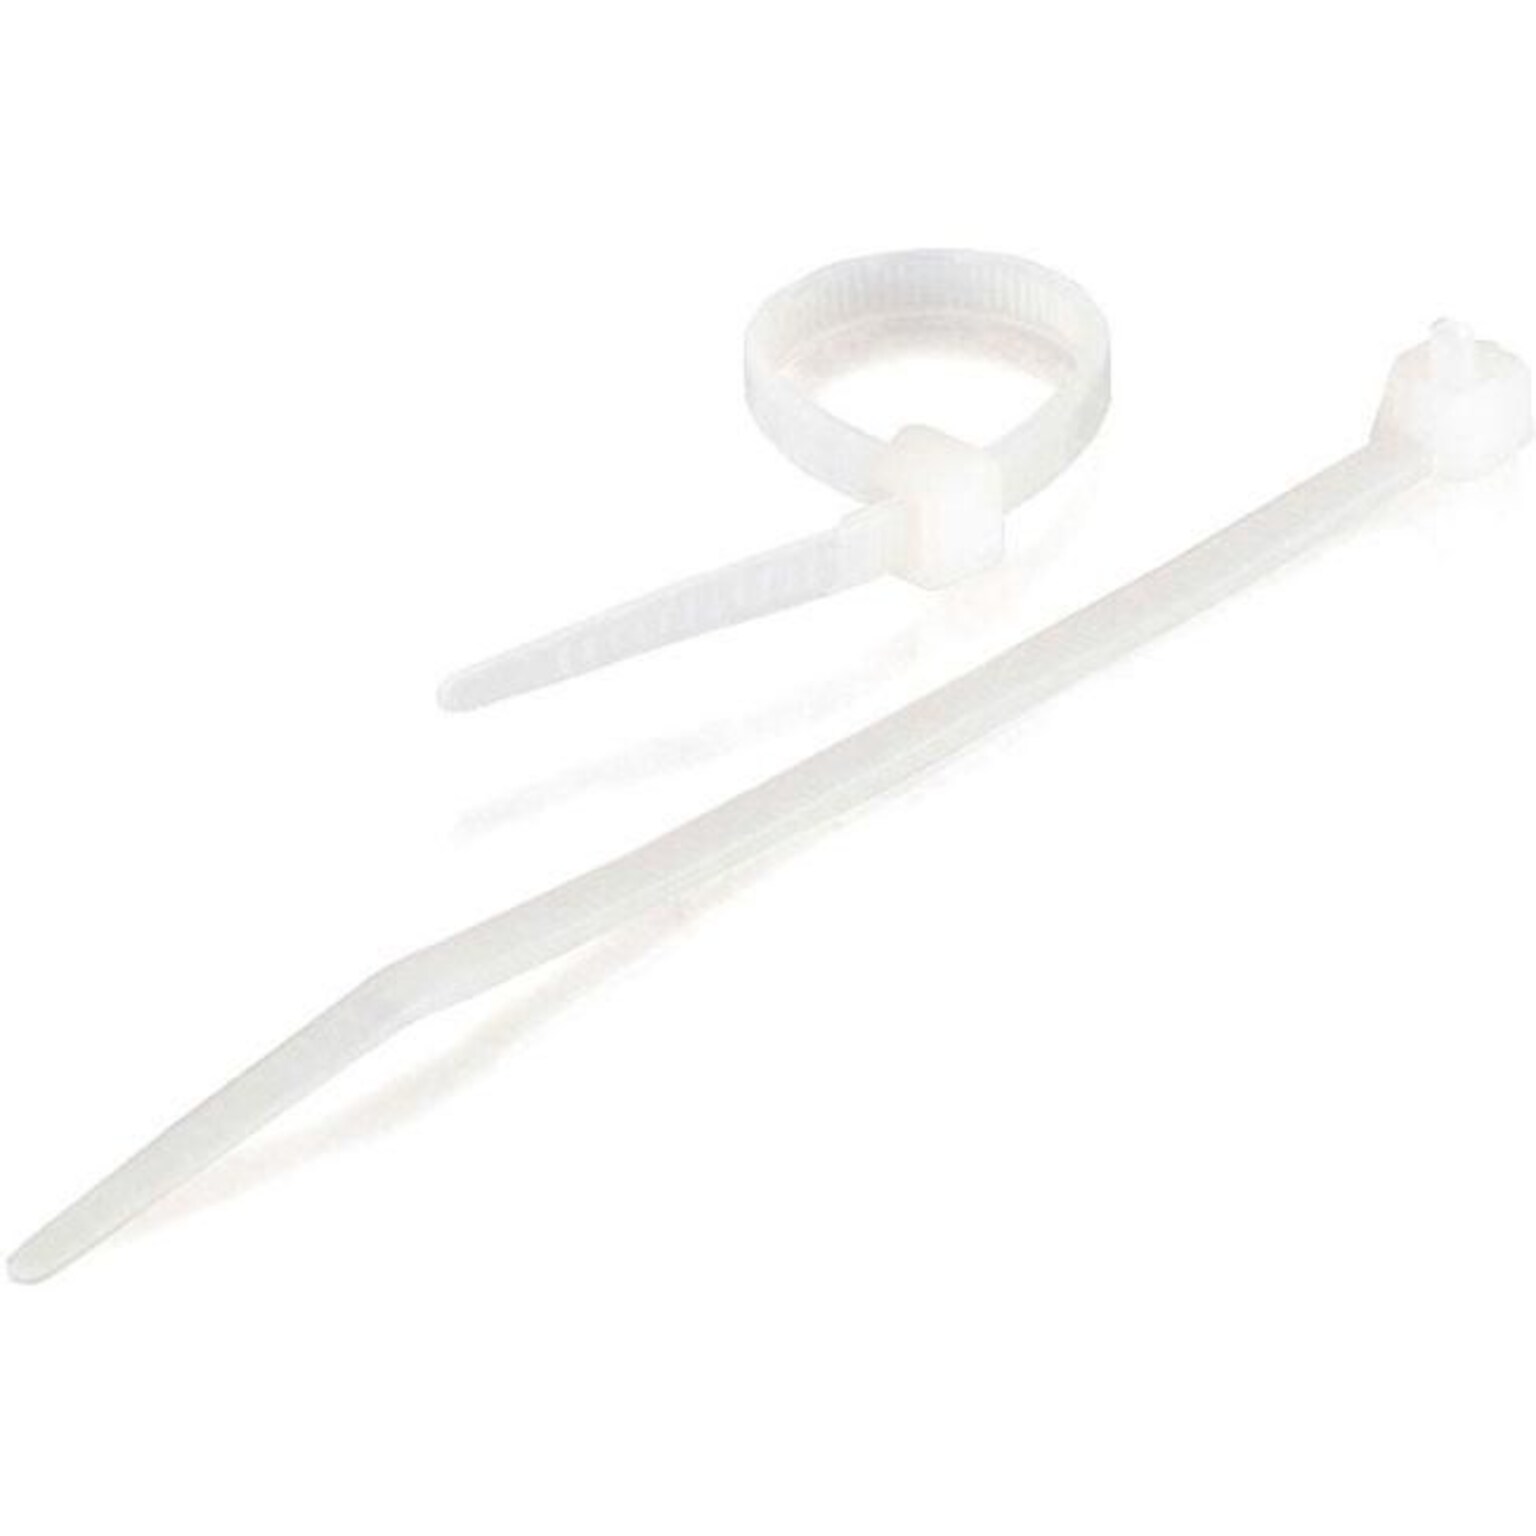 C2G® 11 1/2 Cable Tie; White, 100/Pack